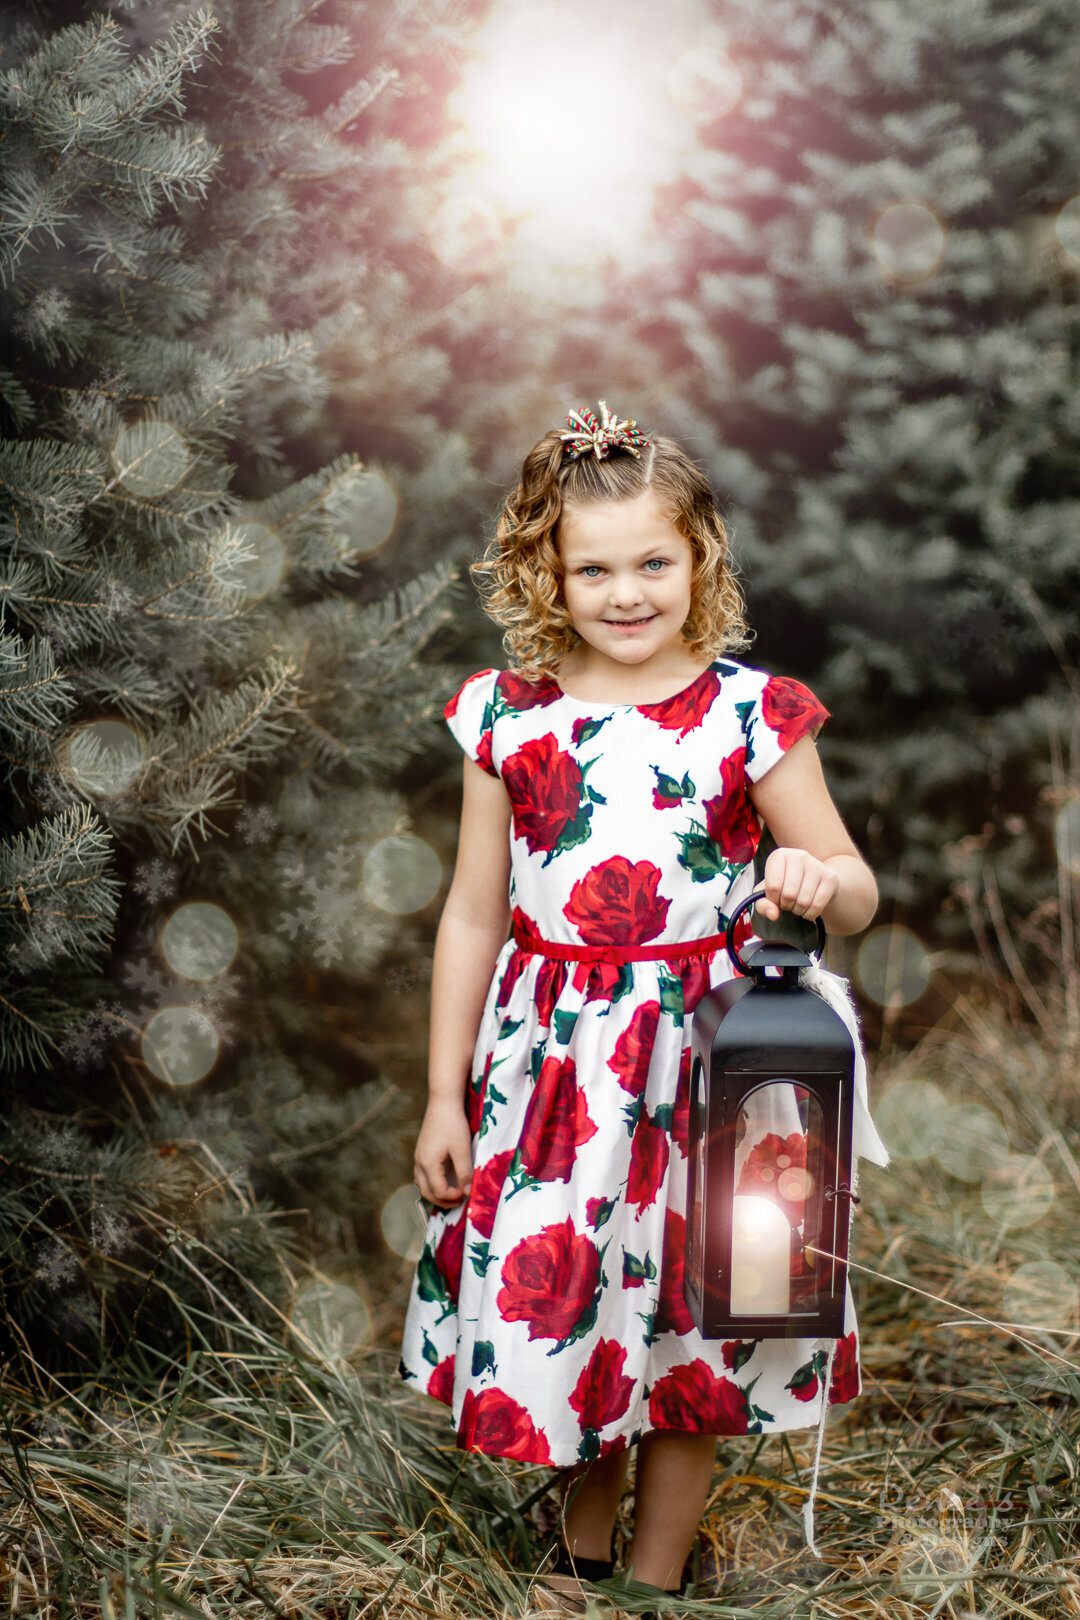 renees-photography-and-designs_christmas-tree-farm_family-children-photoshoot_new-river-valley_blue-ridge-mountains-sm--5